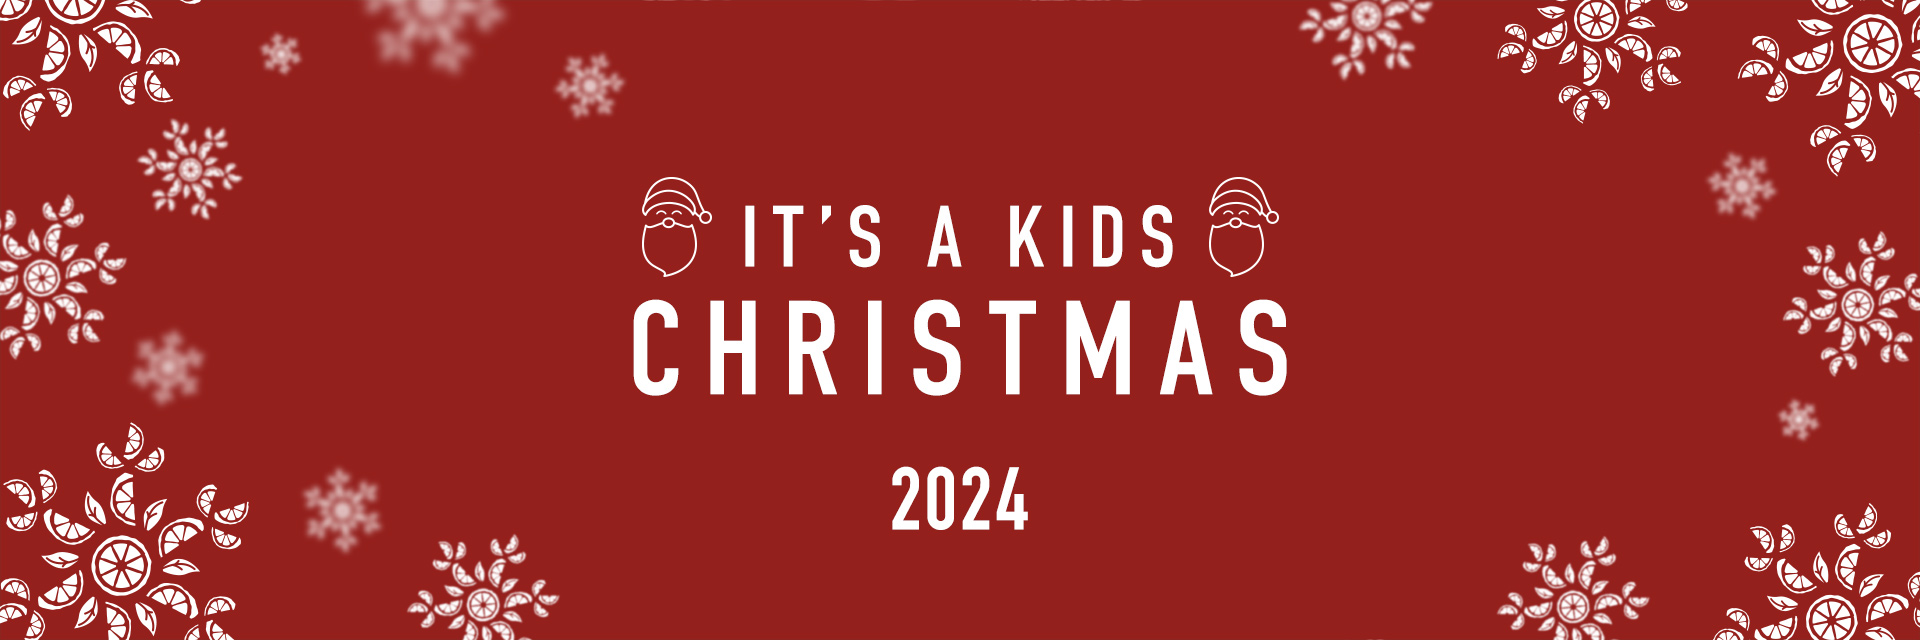 Kids Christmas Menu 2024 at The Stag and Hounds